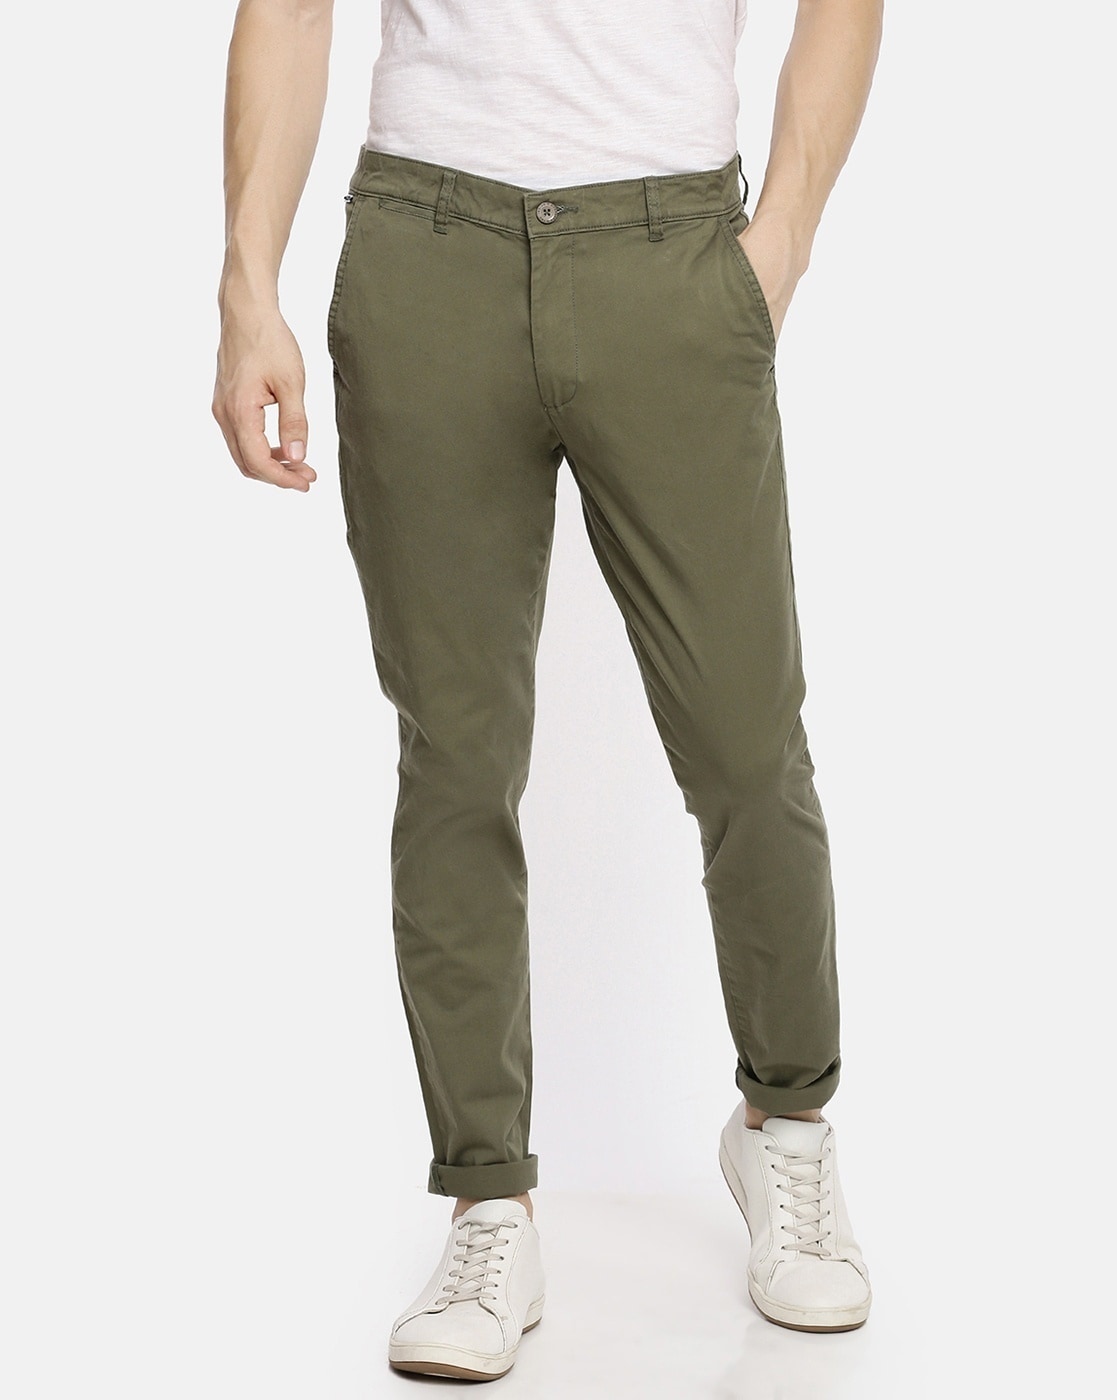 Chino Trousers For Men Shop Online At Best Prices  Turtle